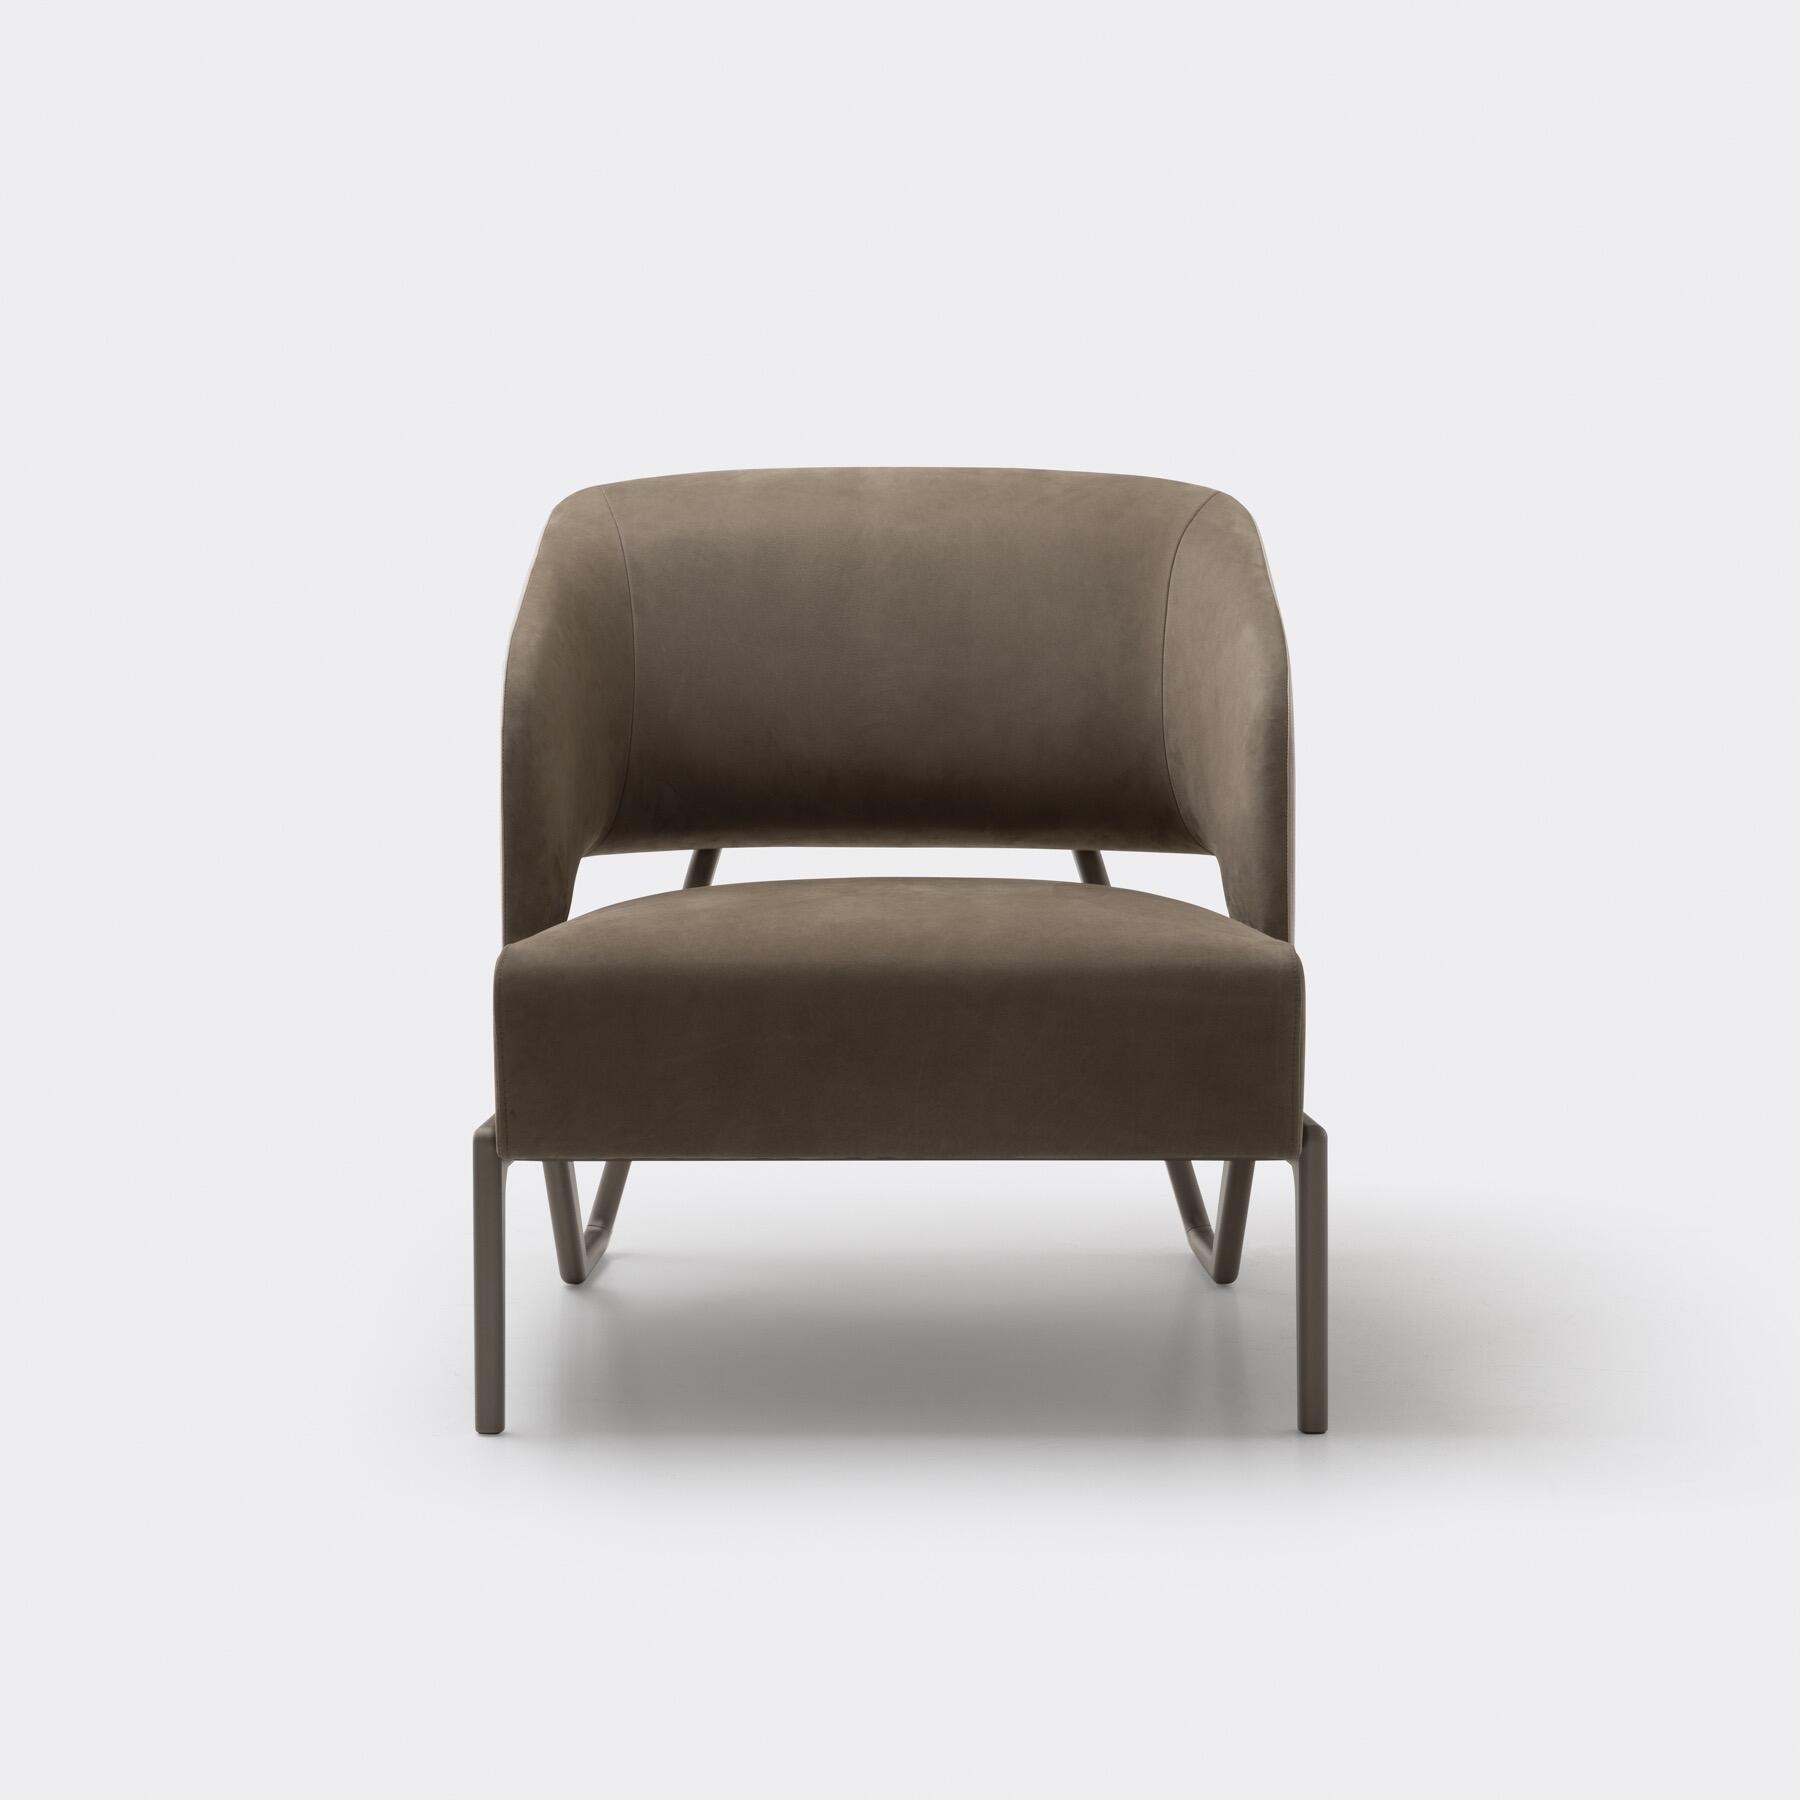 Tubac Lounge Chair, Paris Matte, Made in the Suede: Moleskin, Lustro: Natural State